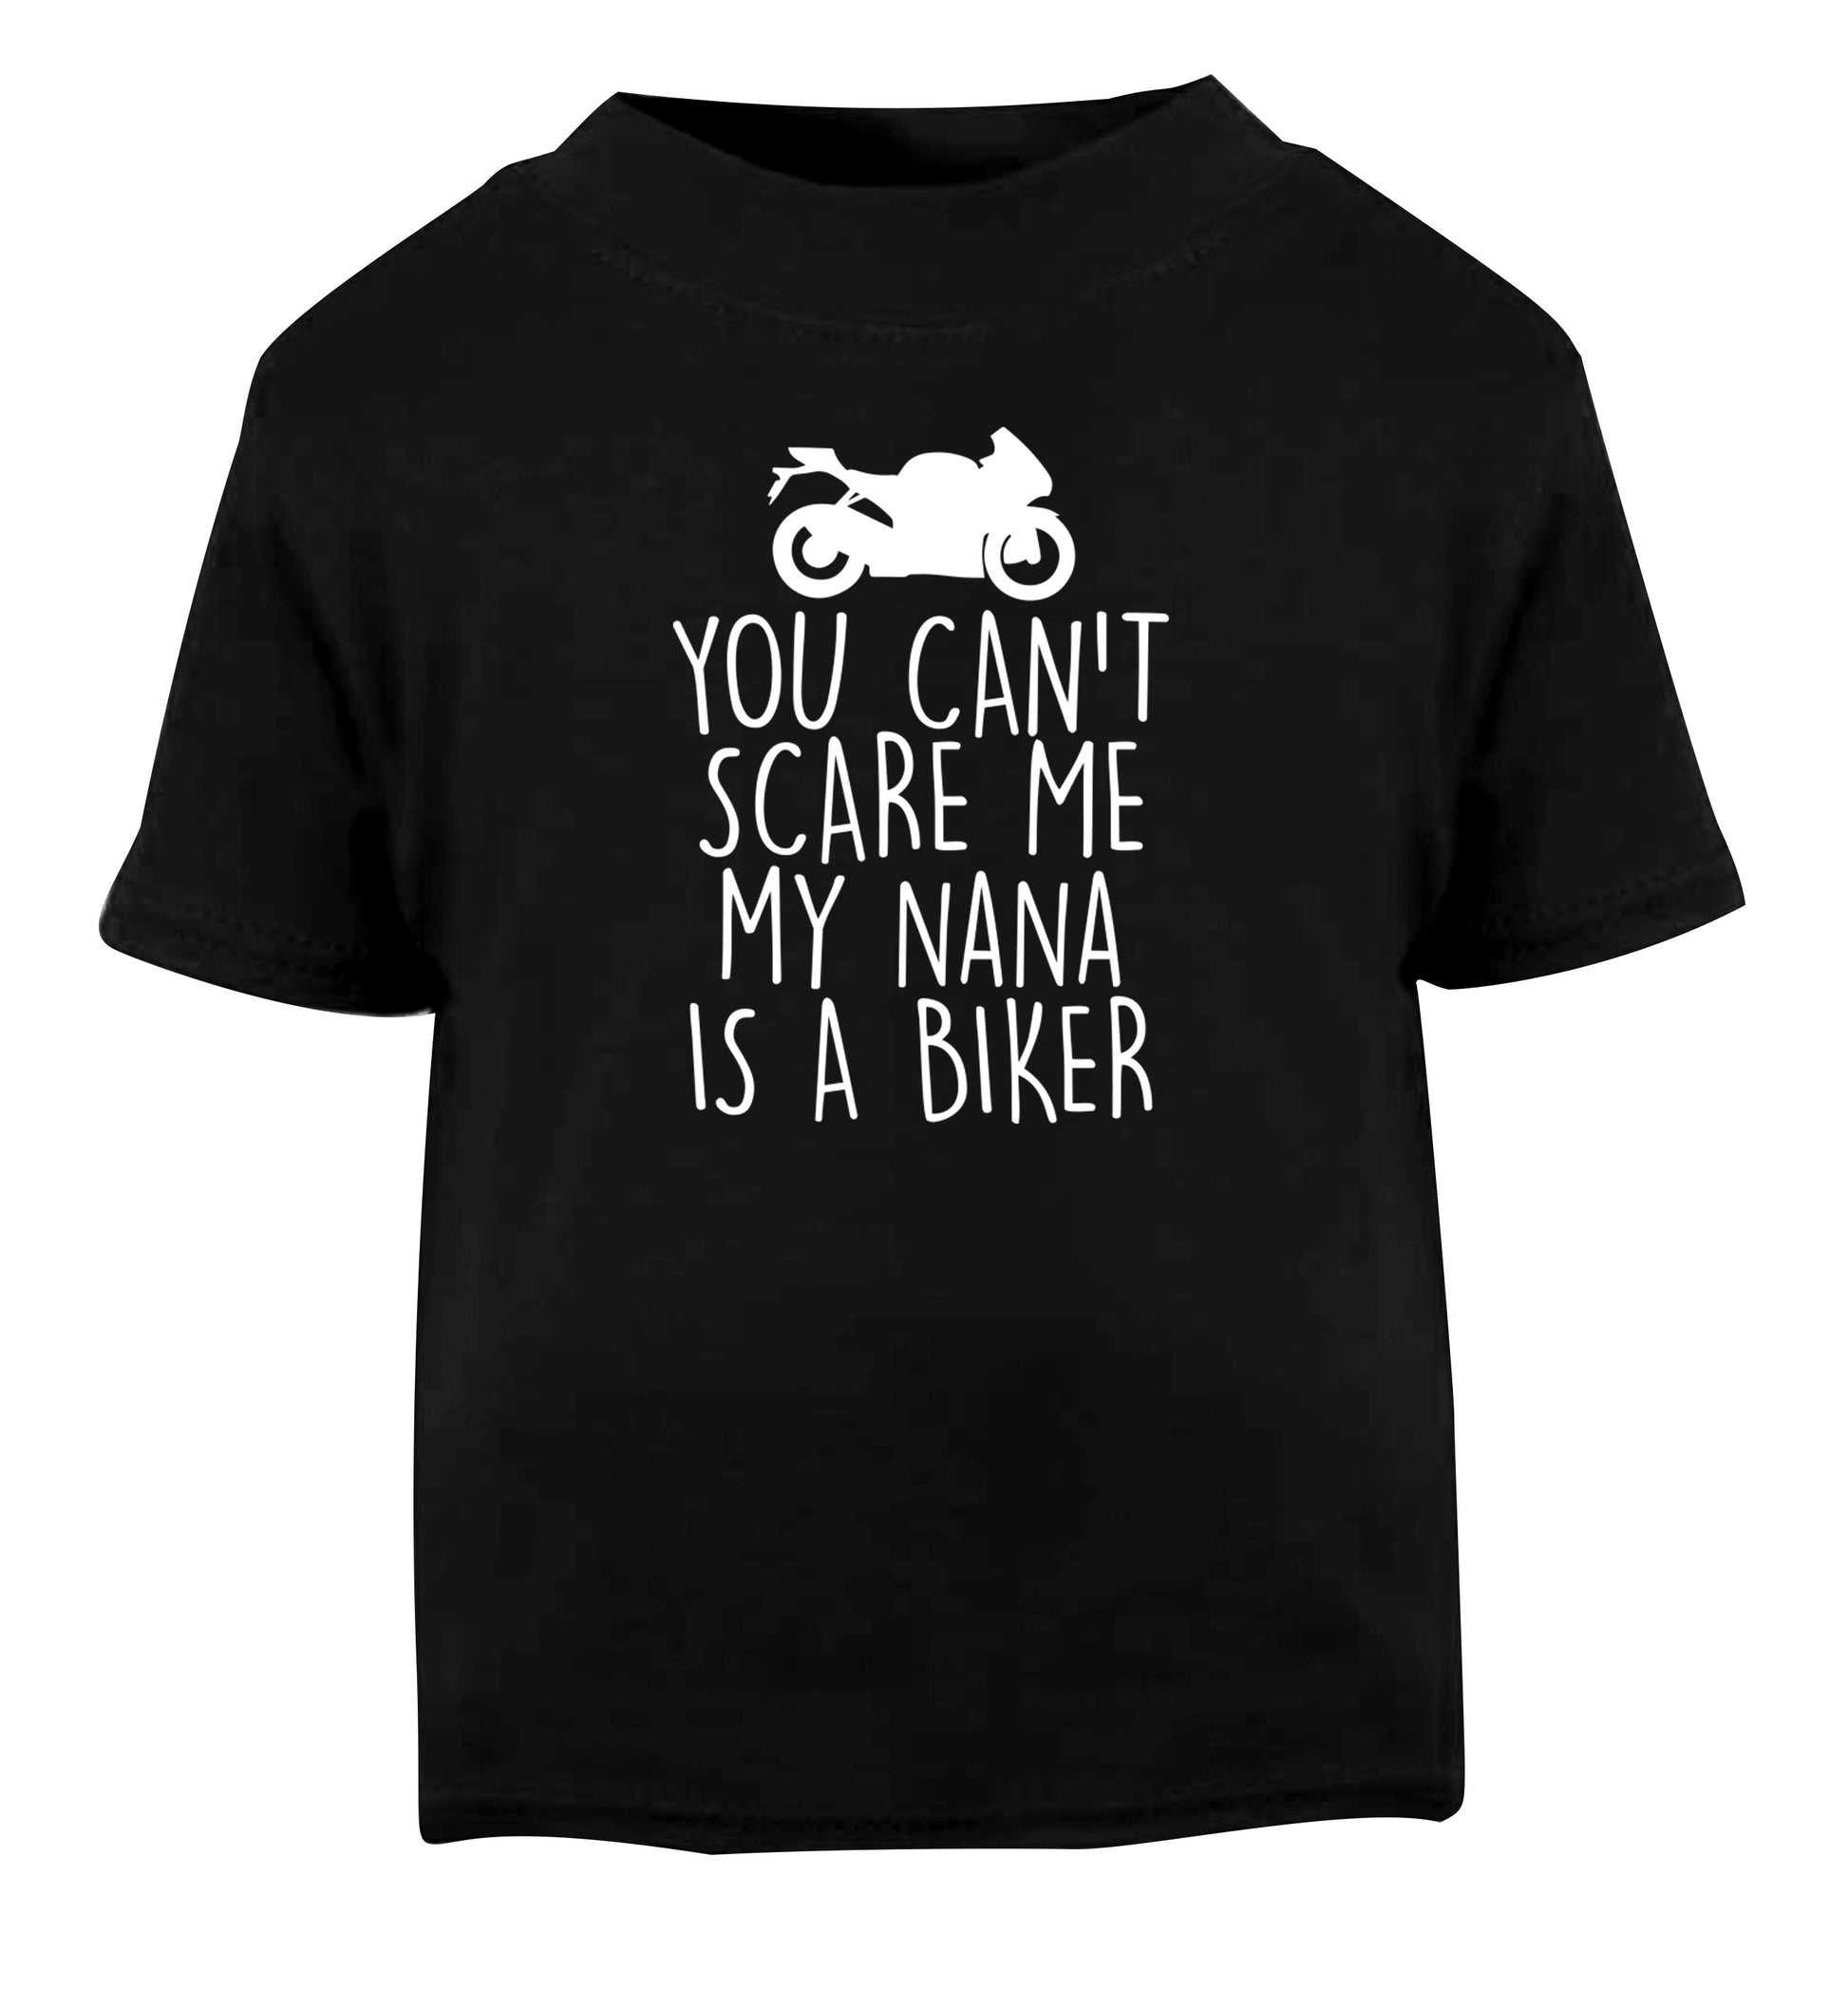 You can't scare me my nana is a biker Black Baby Toddler Tshirt 2 years